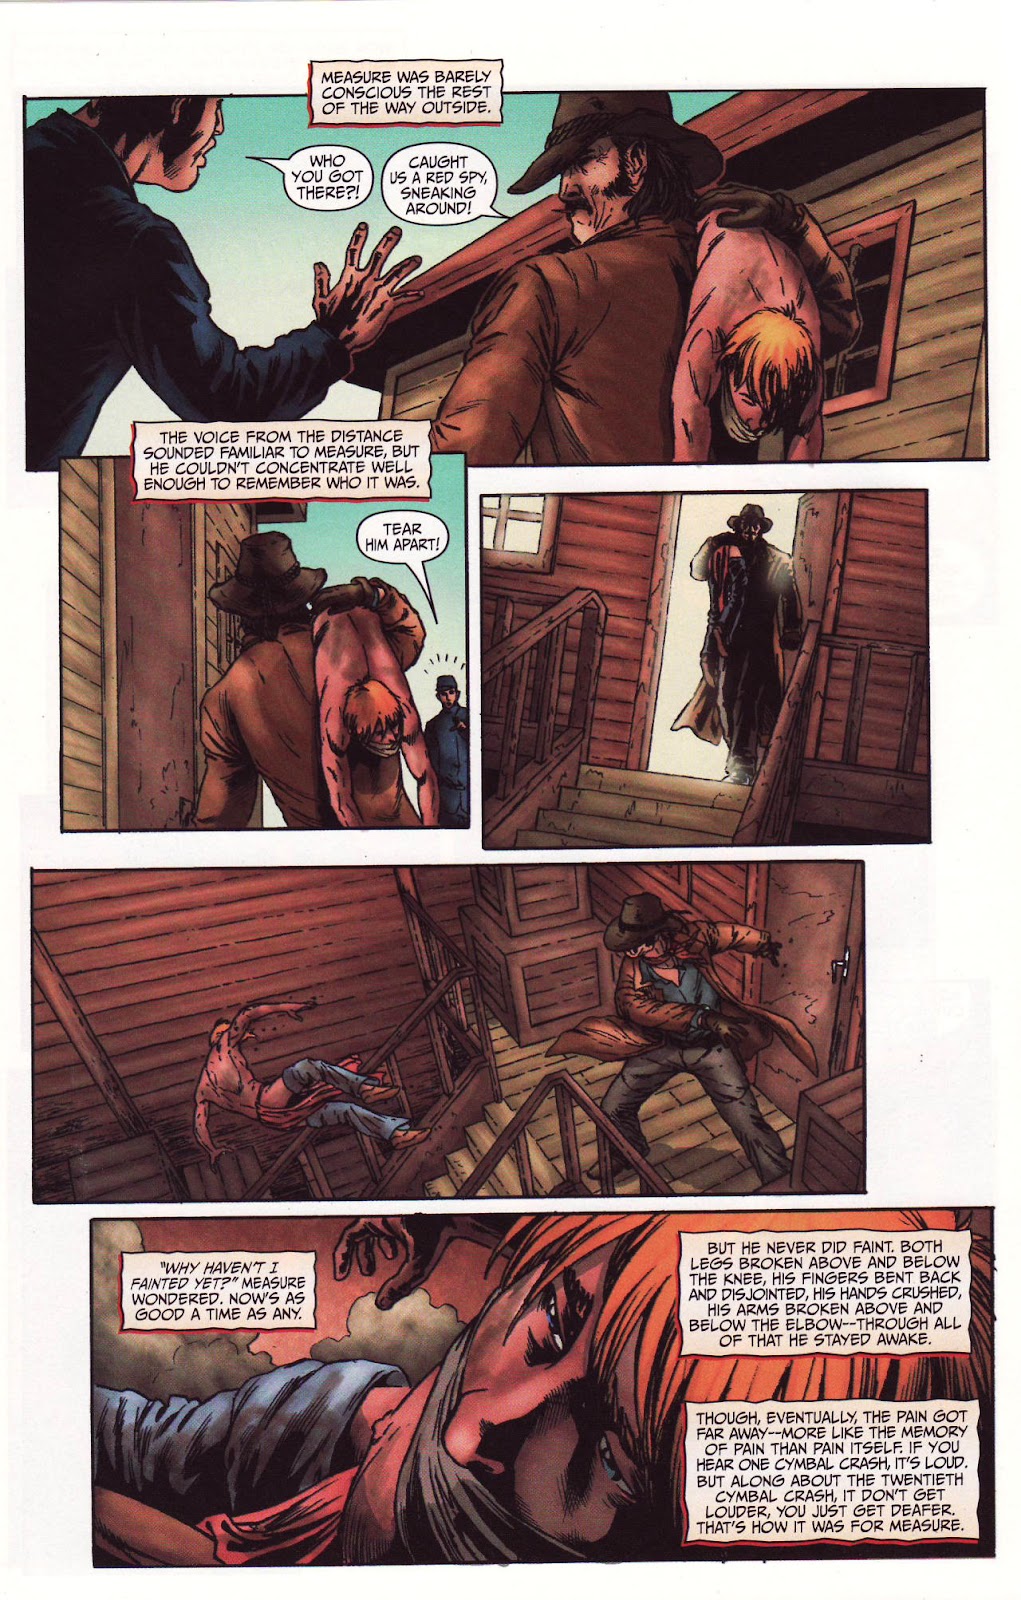 Red Prophet: The Tales of Alvin Maker issue 8 - Page 22